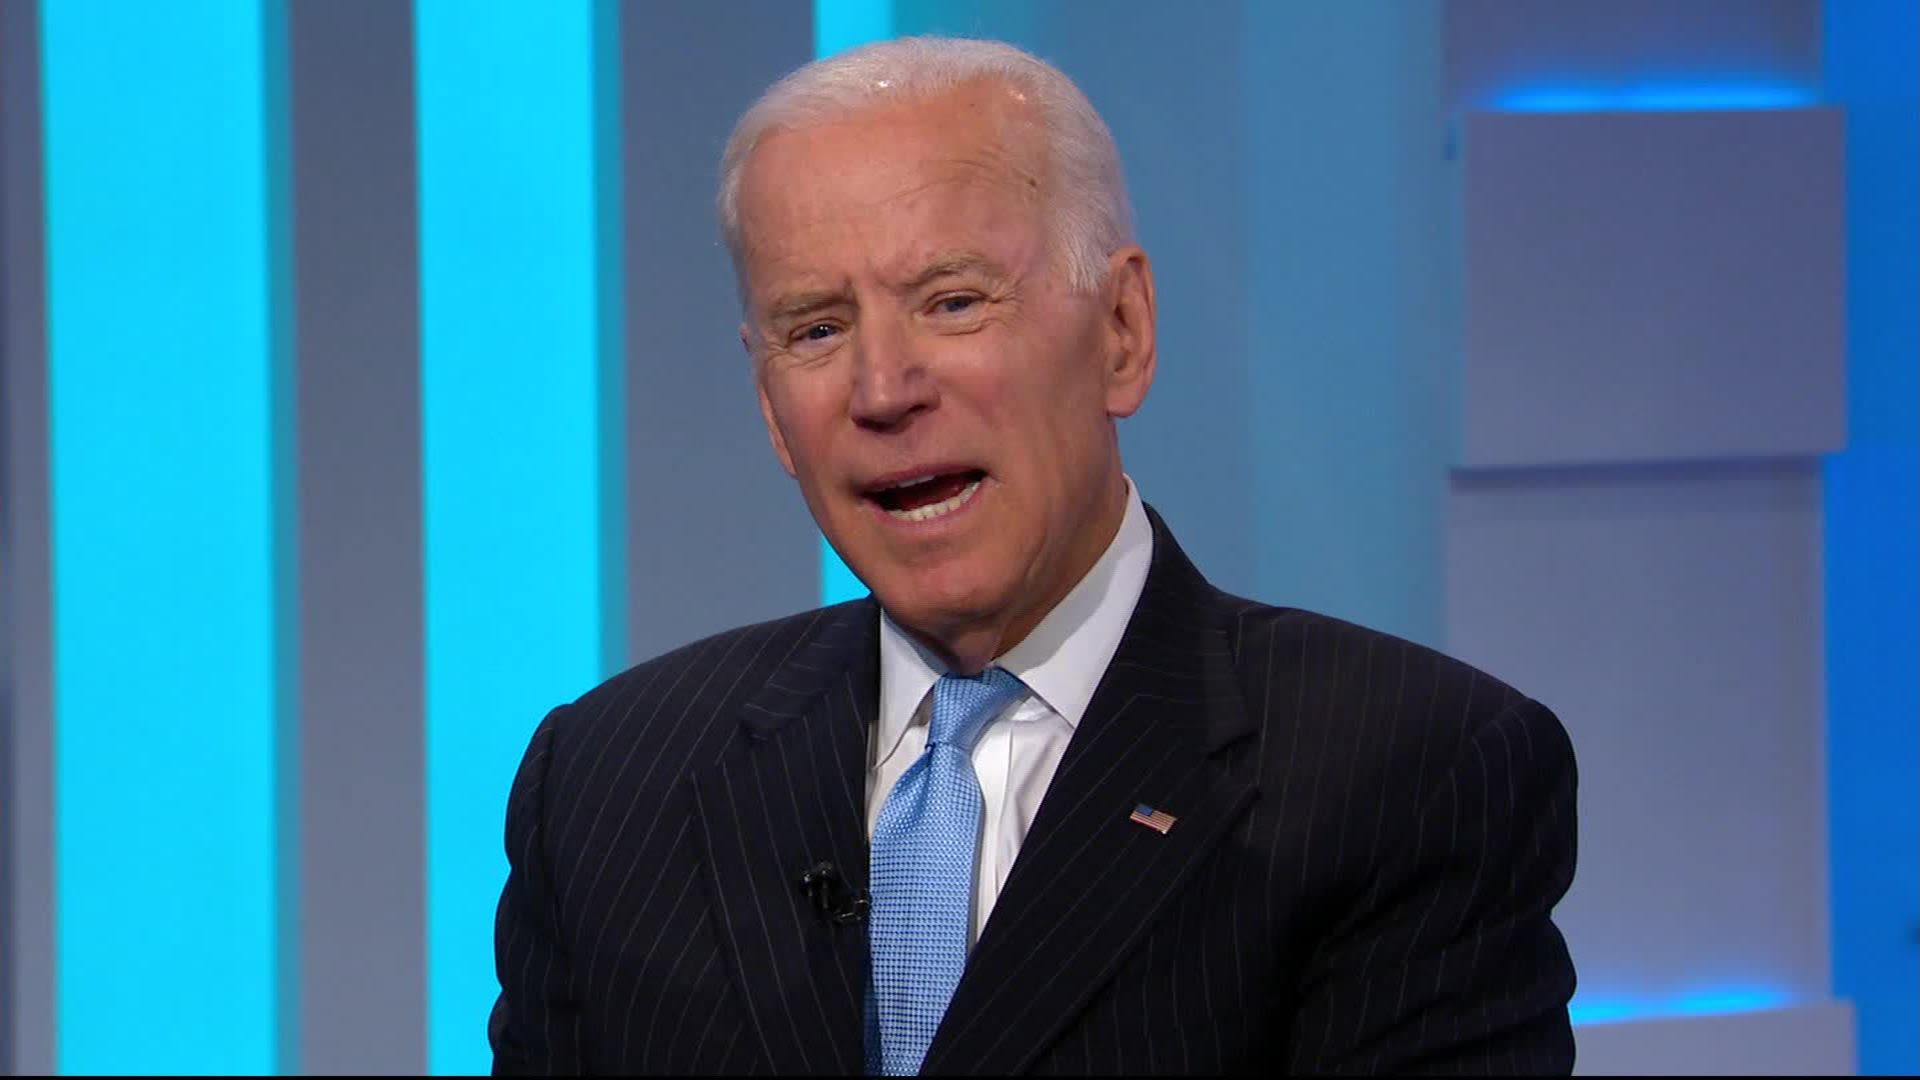 Joe Biden says he would the out of Trump if in high school | CNN Politics